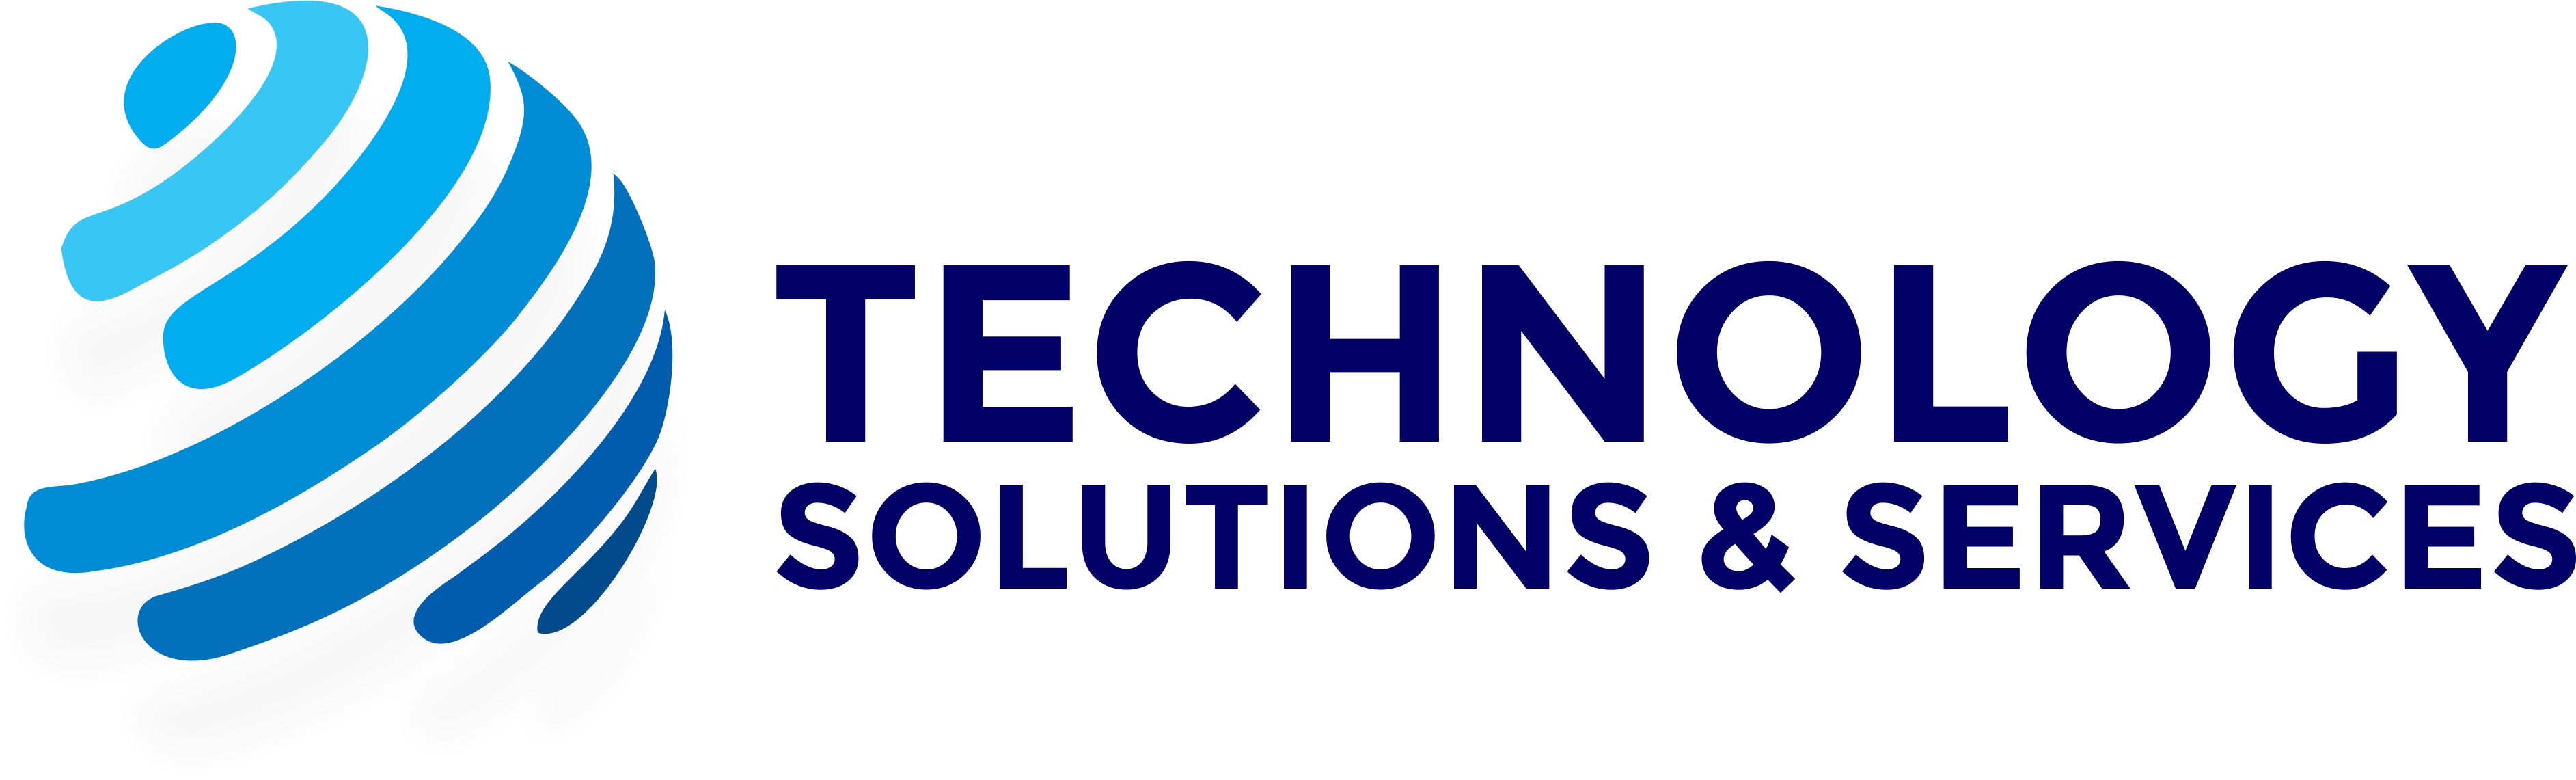 Technology Solutions and Services